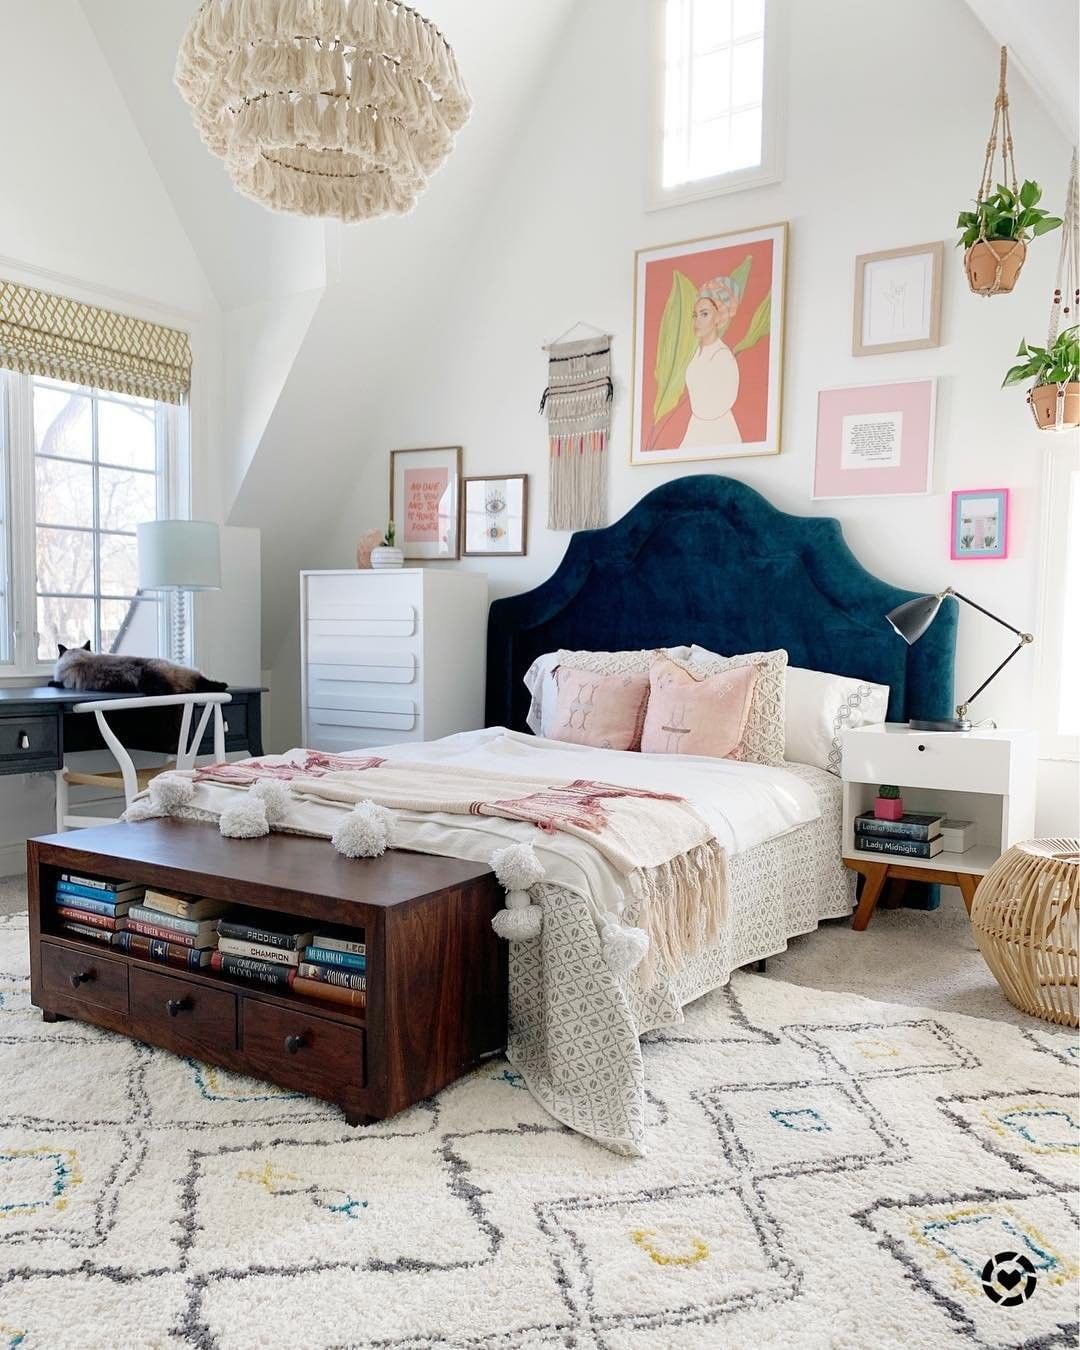 10 Insanely Cool Rooms That Started With a Bohemian Rug